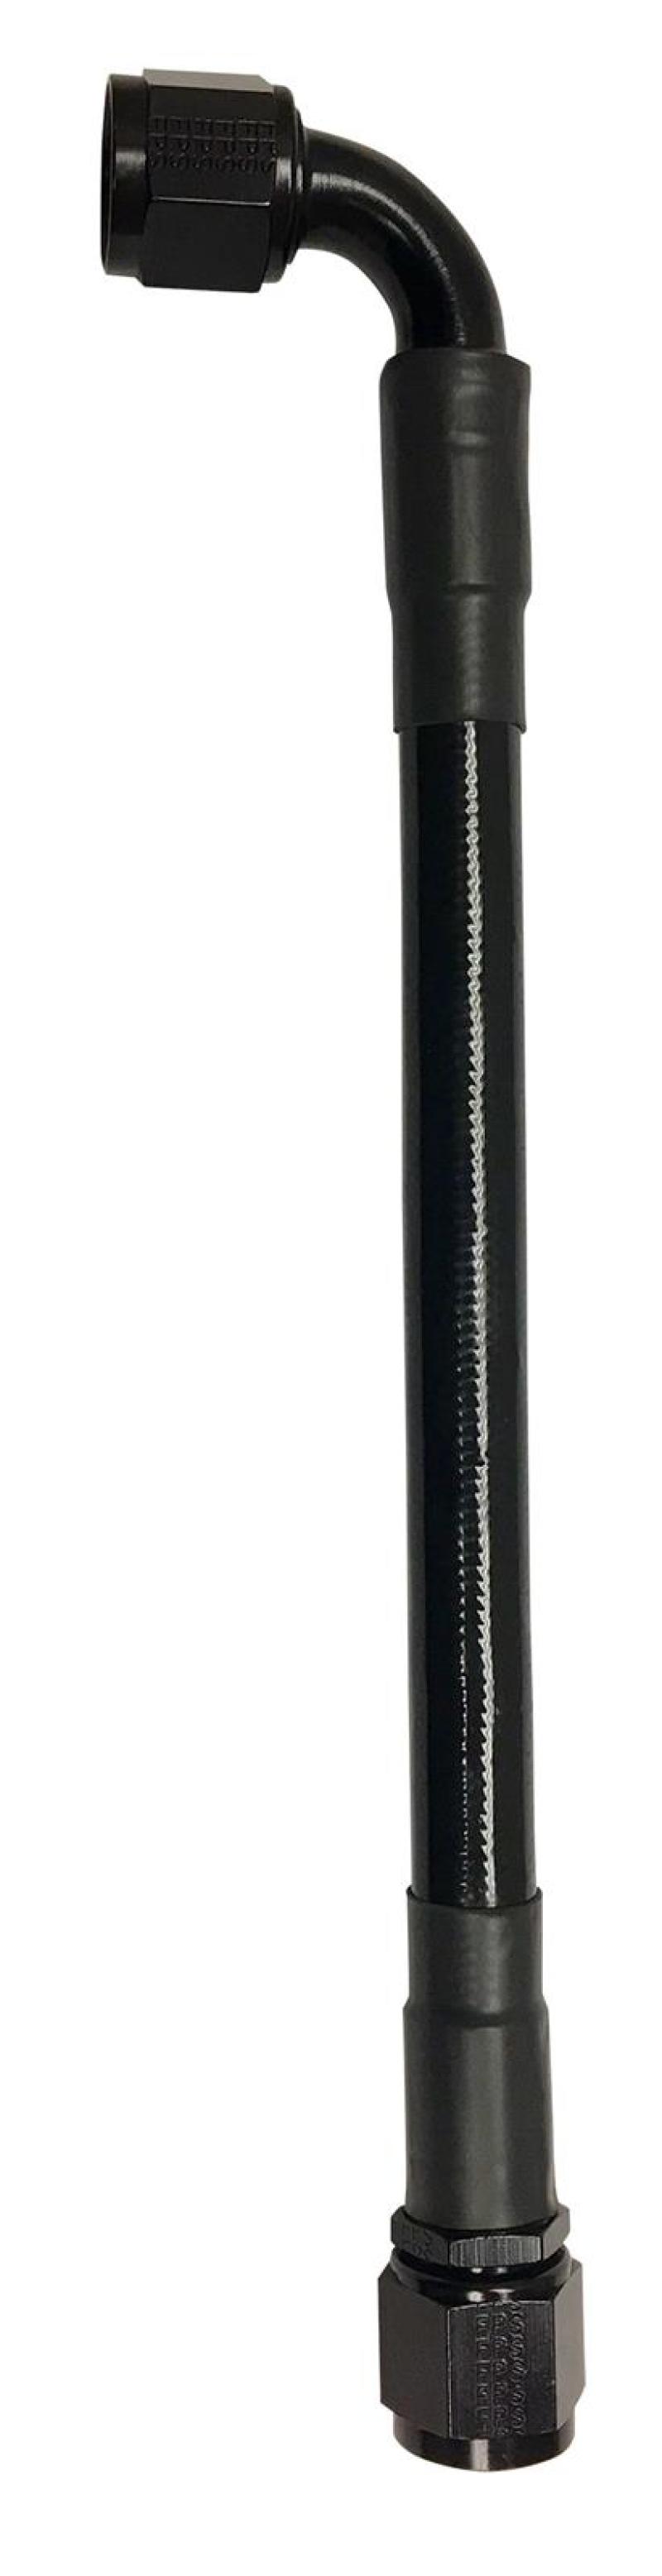 Fragola -10AN Ext Black PTFE Hose Assembly Straight x 90 Degree 42in - 6029-1-2-42BL